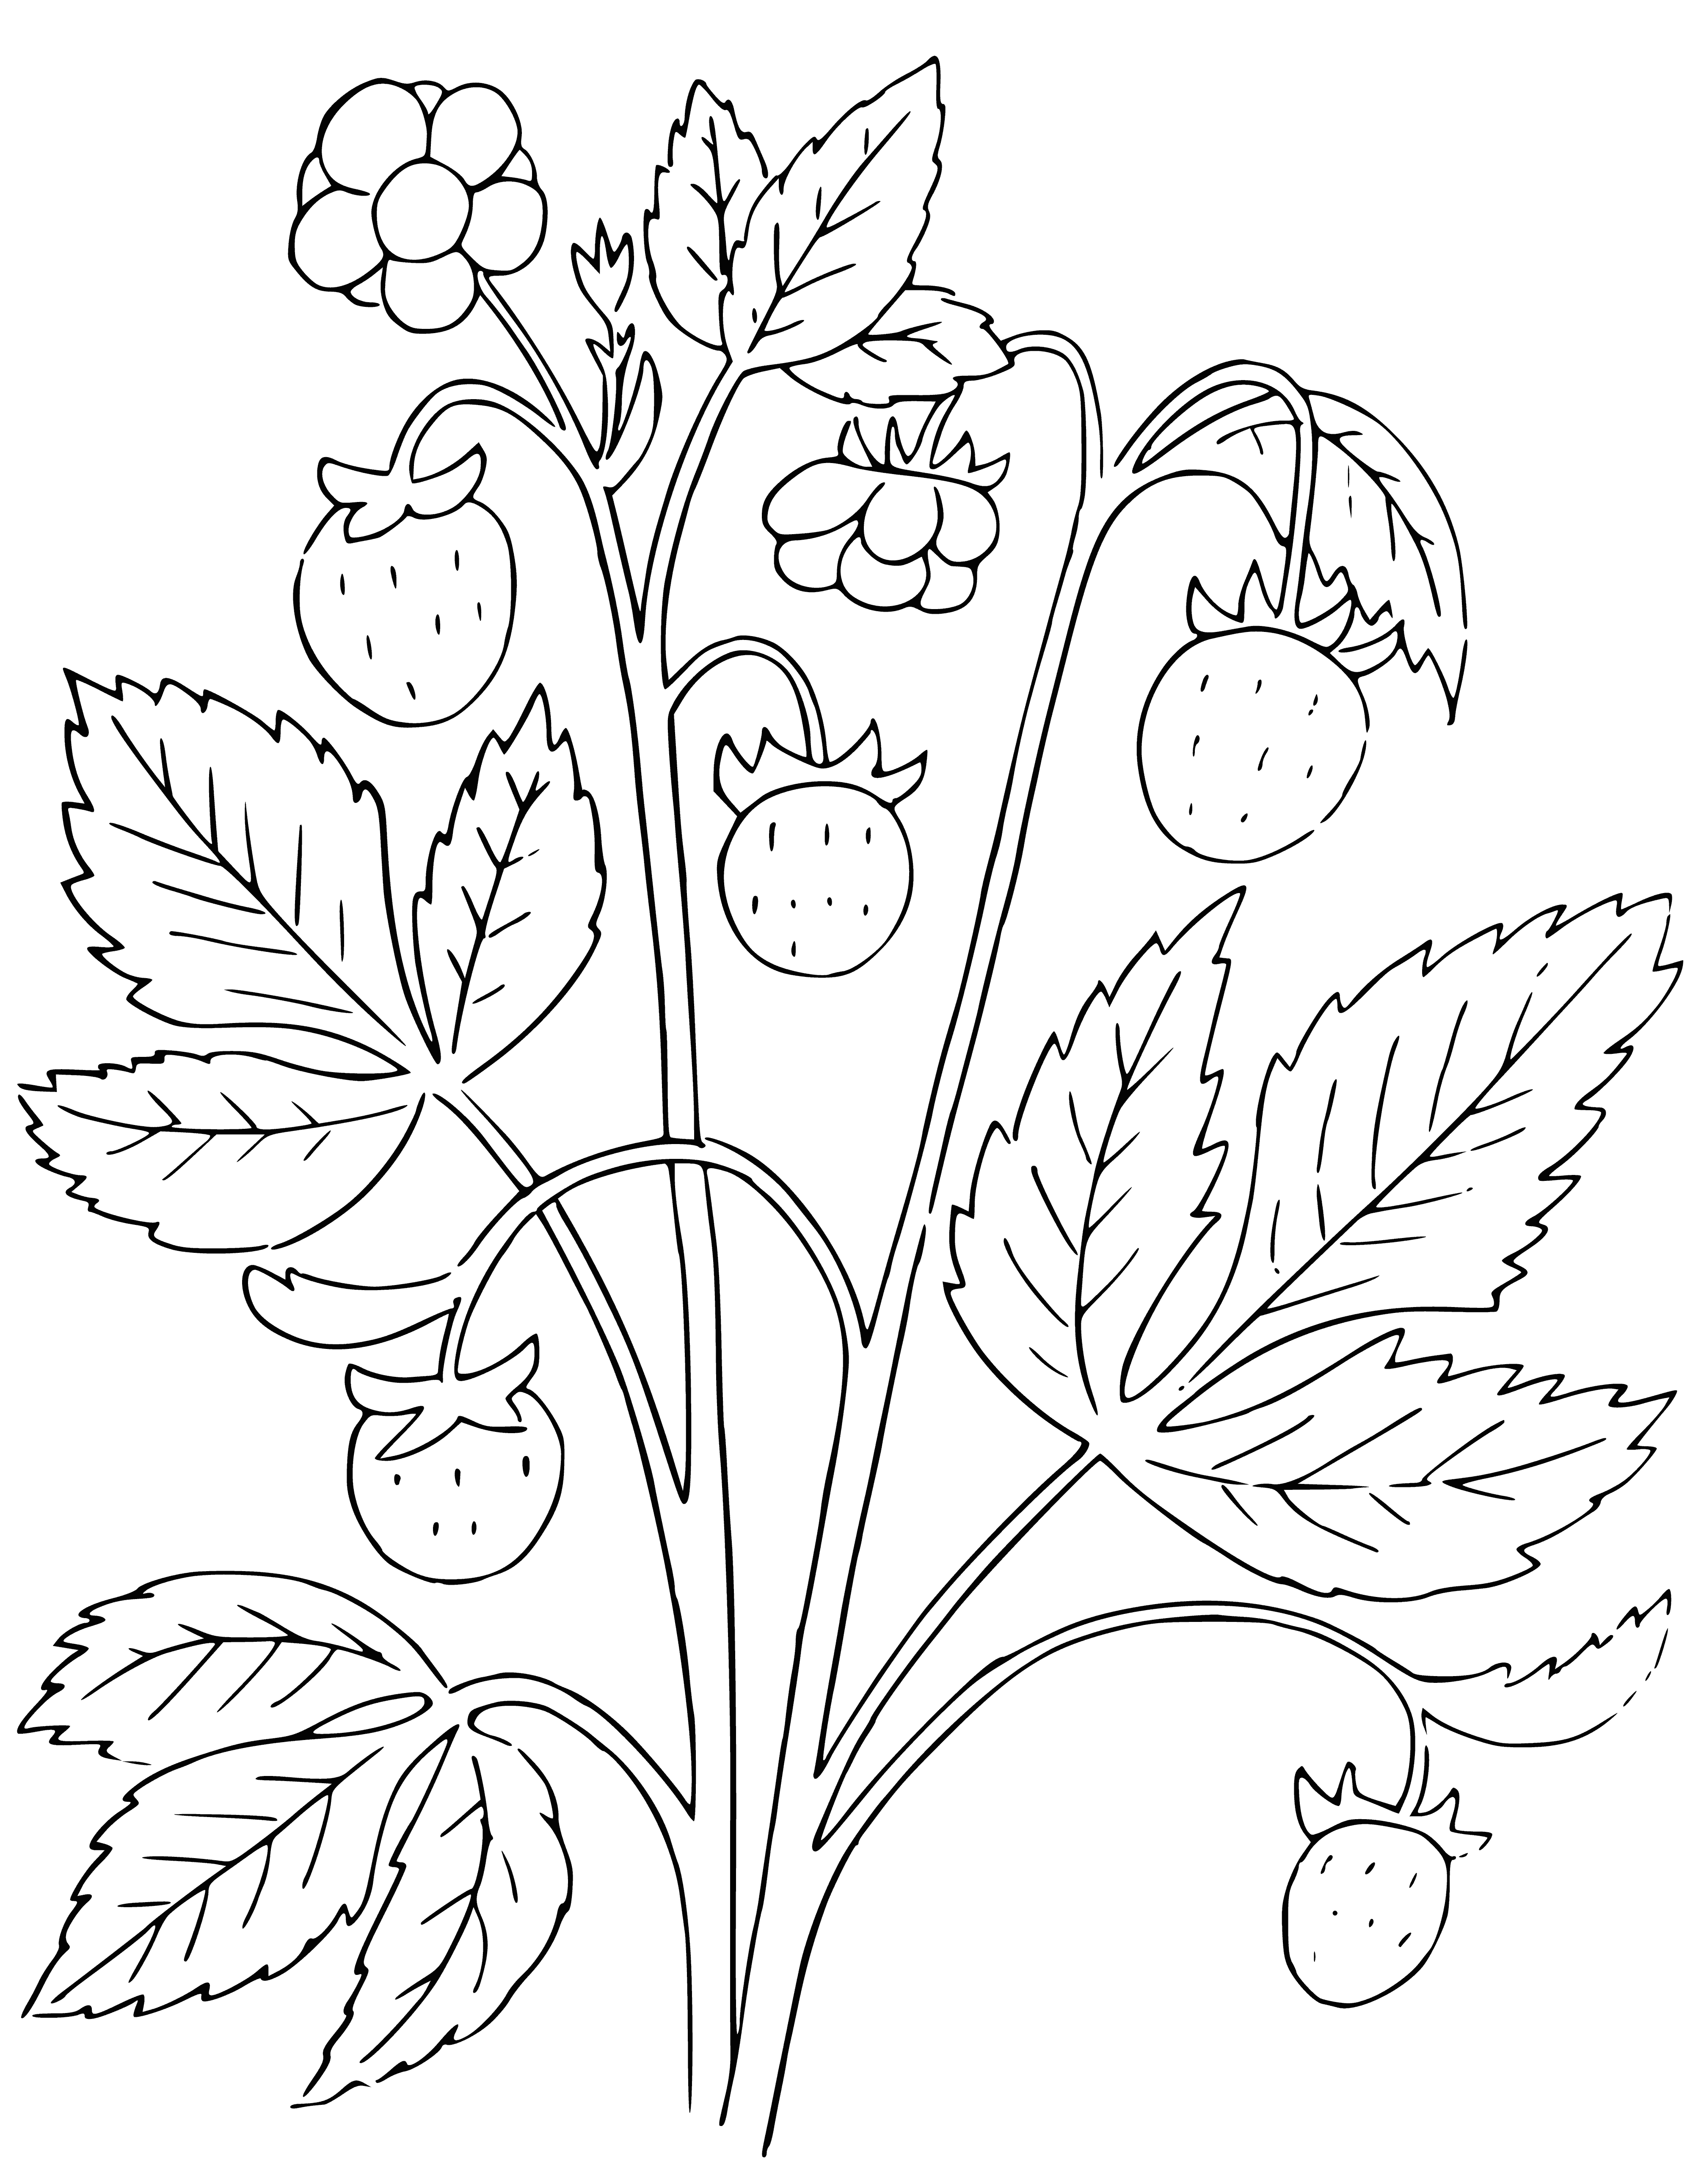 coloring page: Colorful strawberries on a green plant, ripe & ready to eat! #colorful #strawberries